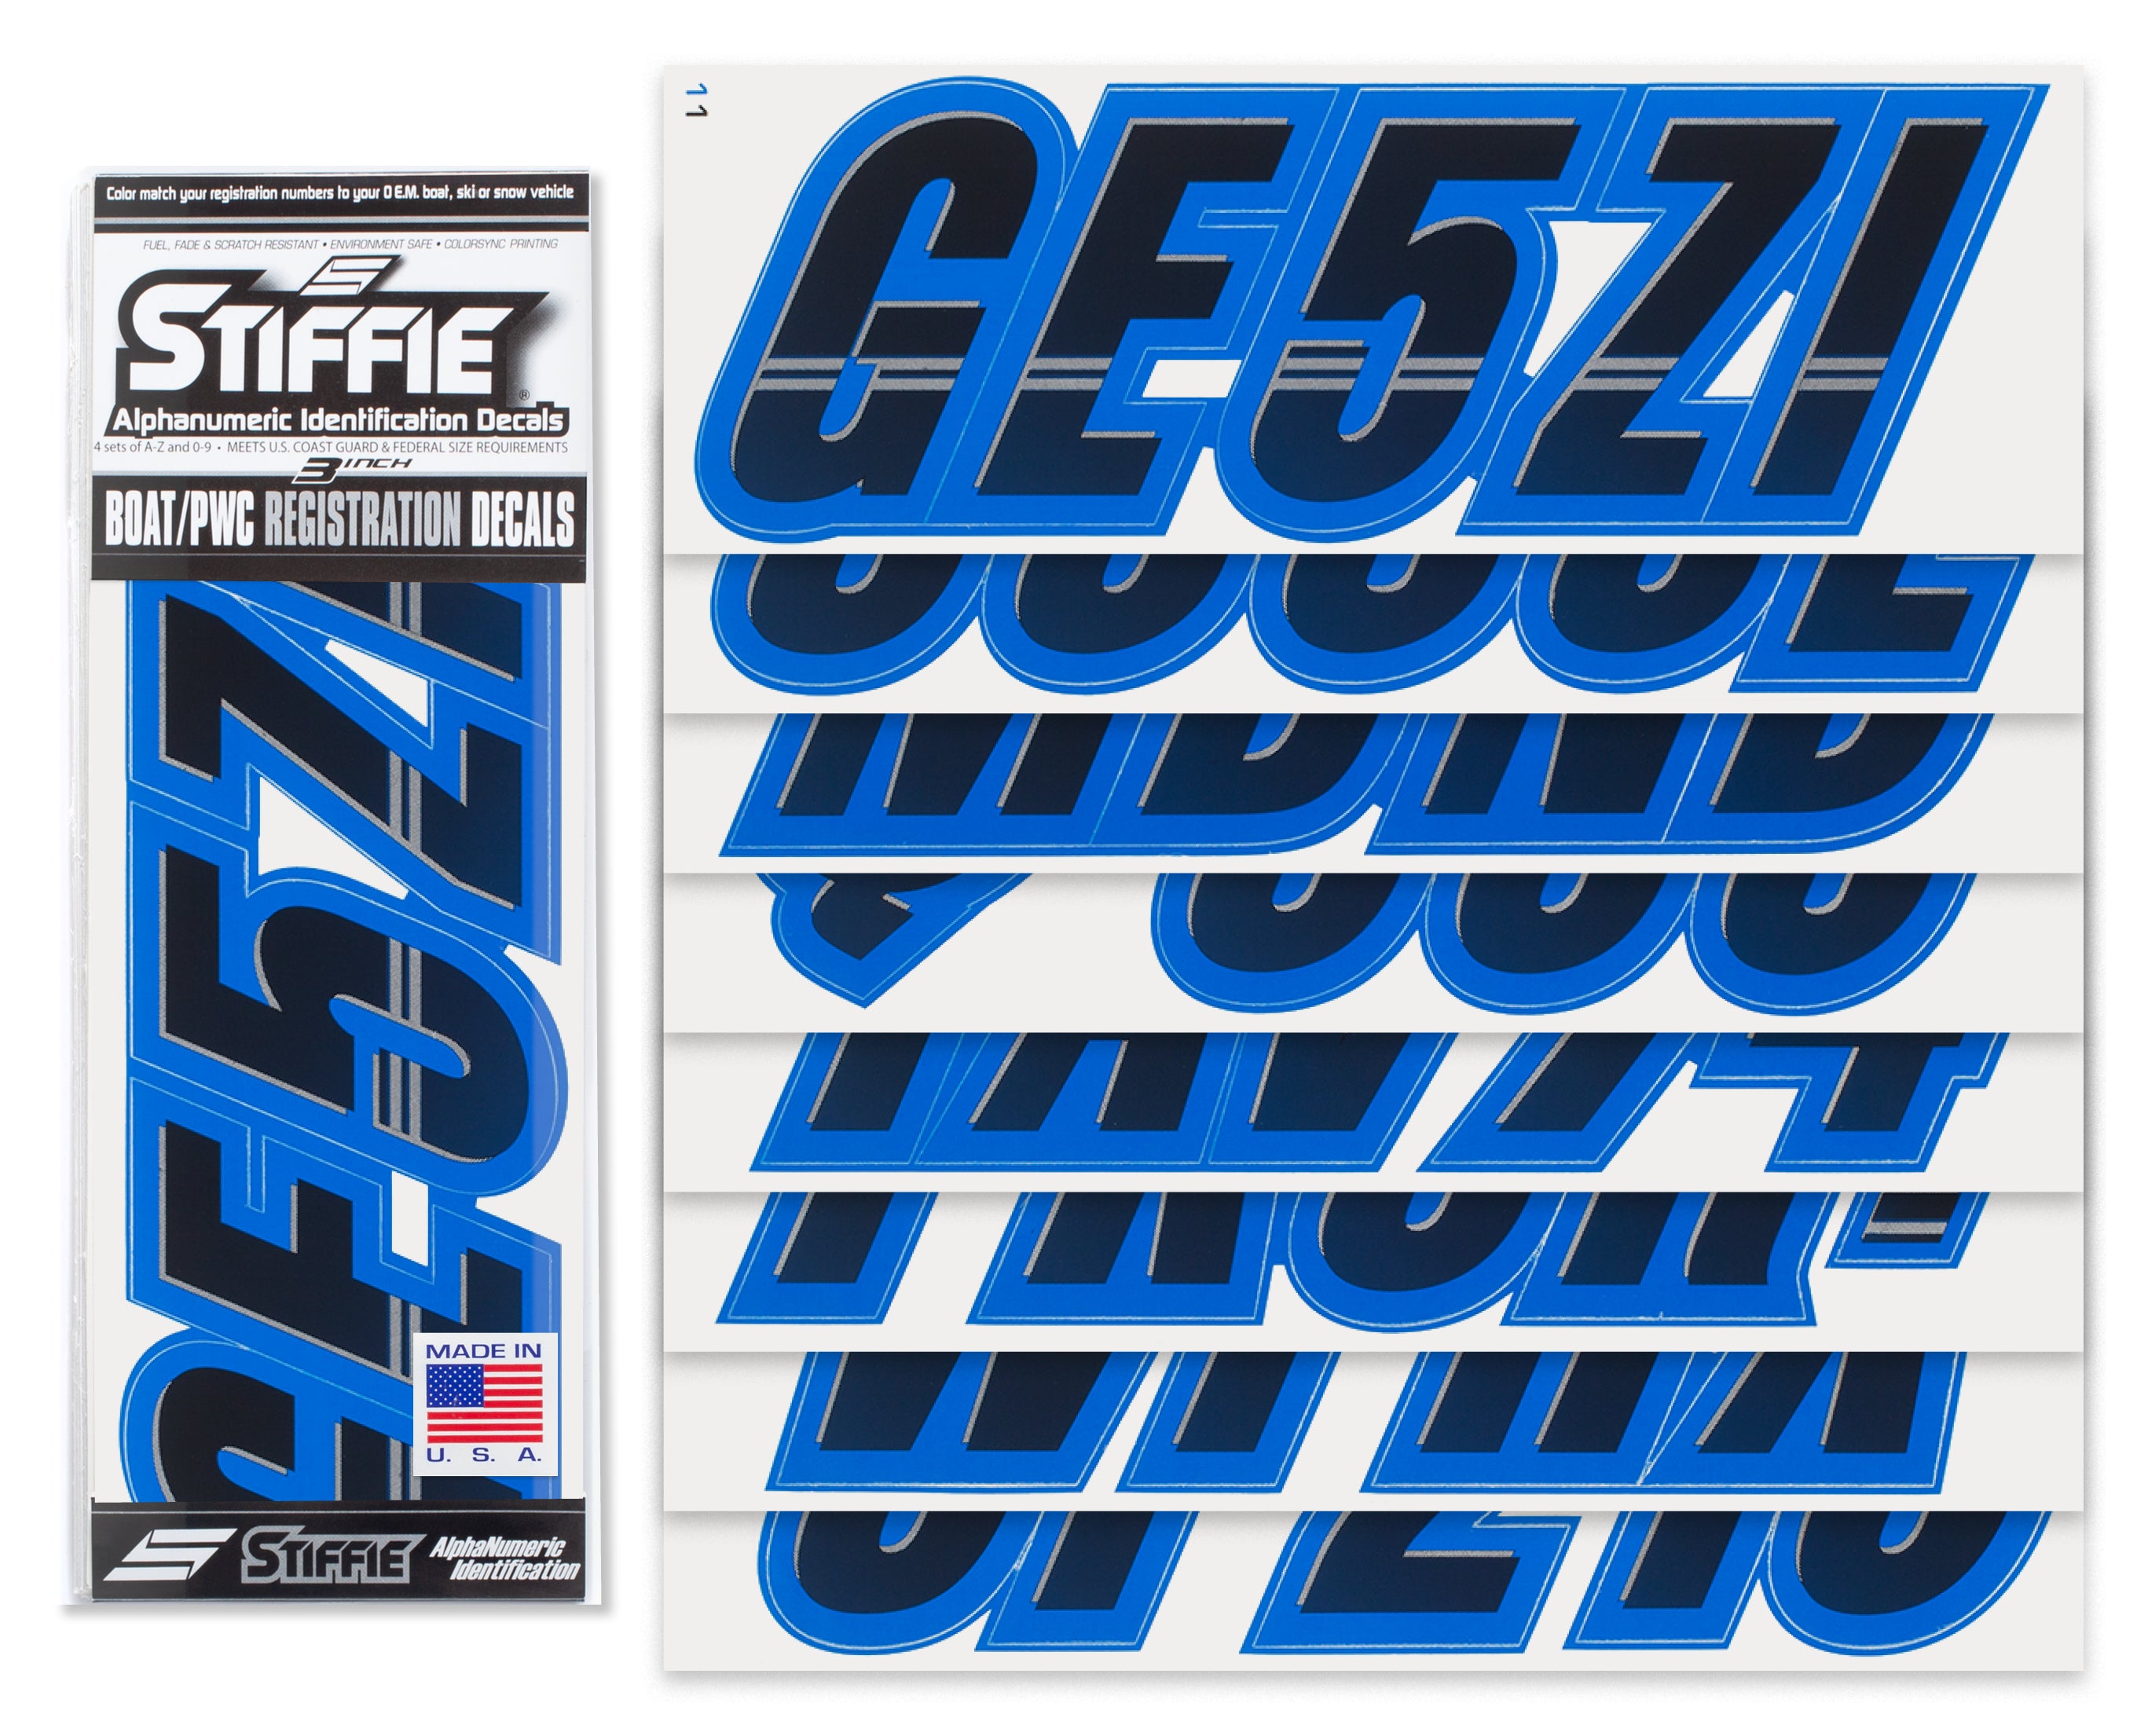 Techtron Black/Blue 3" Alpha-Numeric Registration Identification Numbers Stickers Decals for Boats & Personal Watercraft